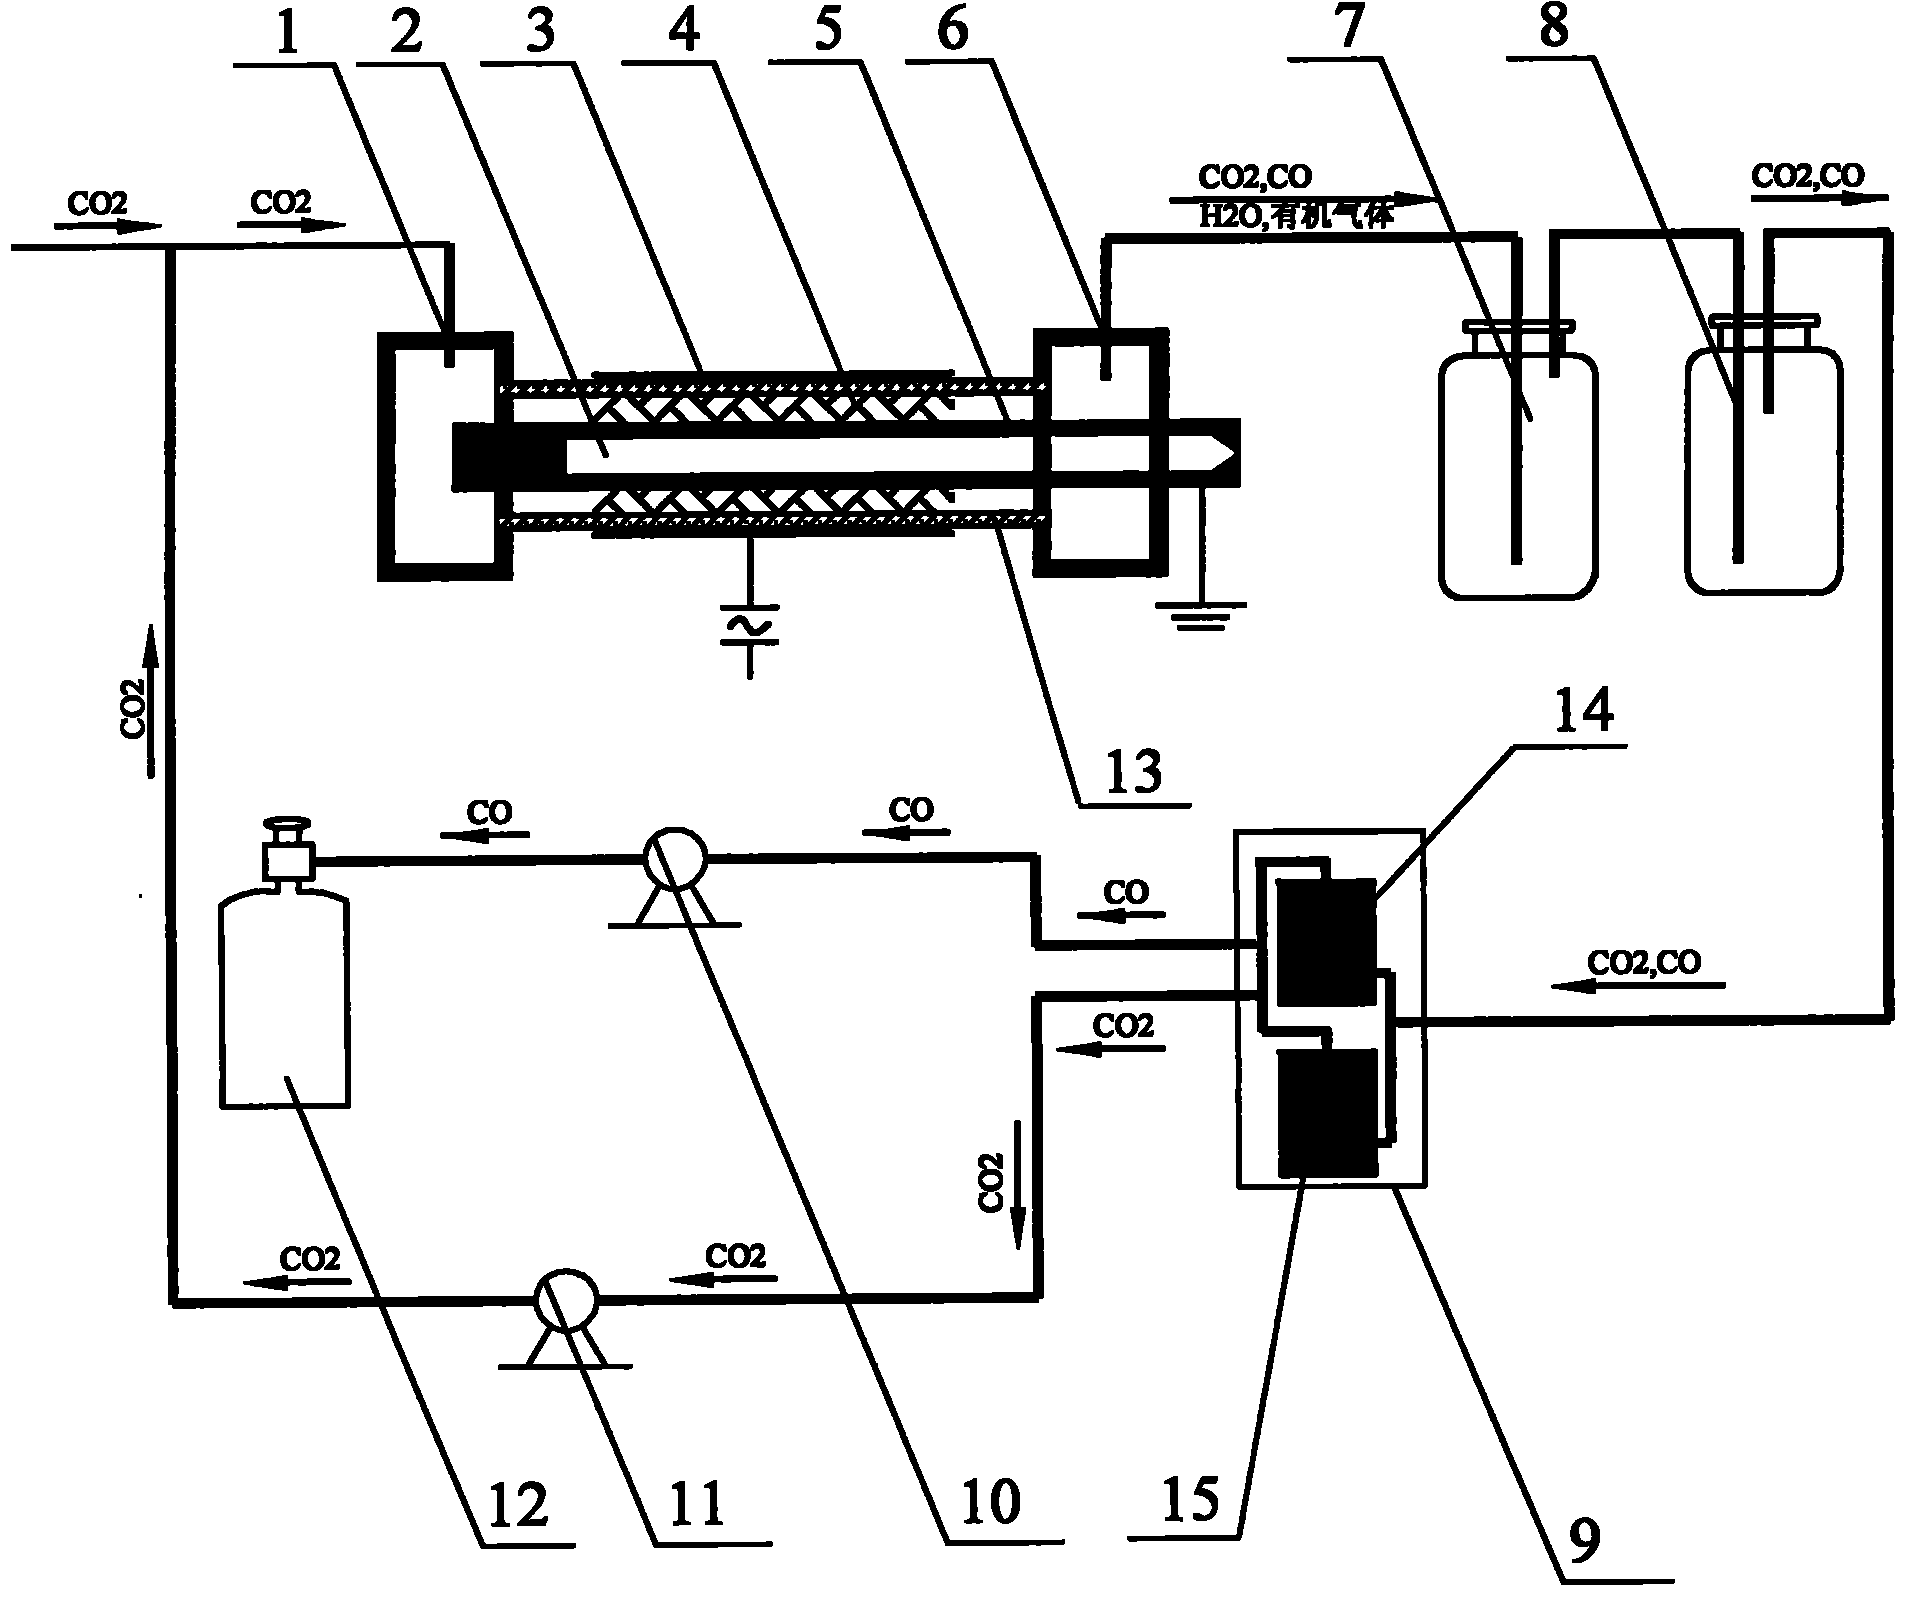 Apparatus and method used for reducing CO2 by using dielectric barrier discharge plasma combined with biomass